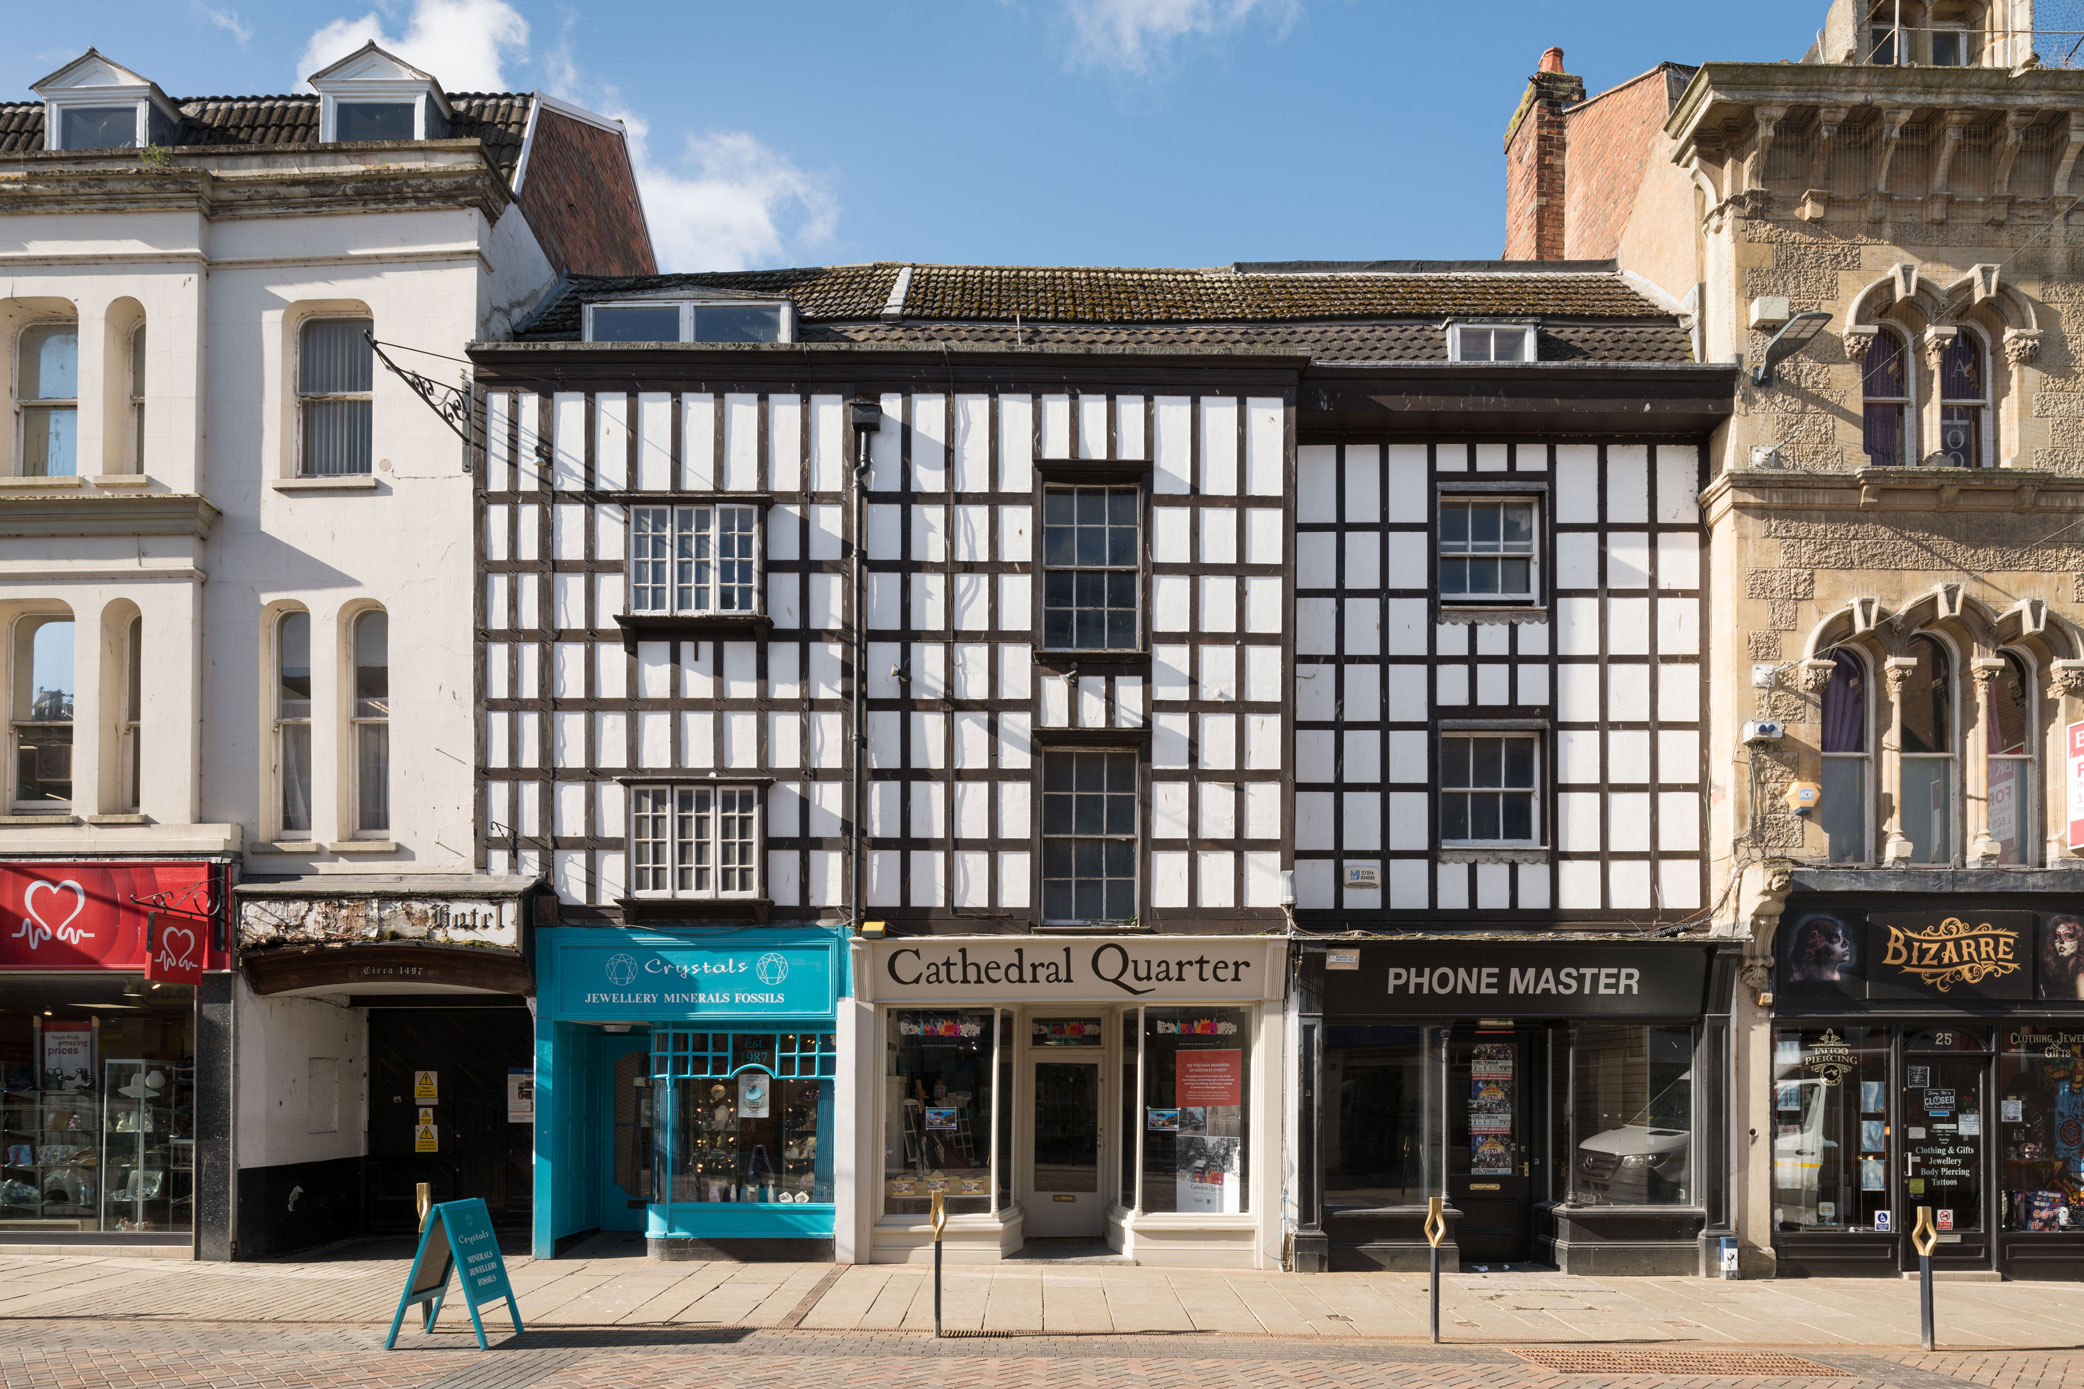 A three storey timber-framed building with shop fronts and a carriage entrance to the ground floor.